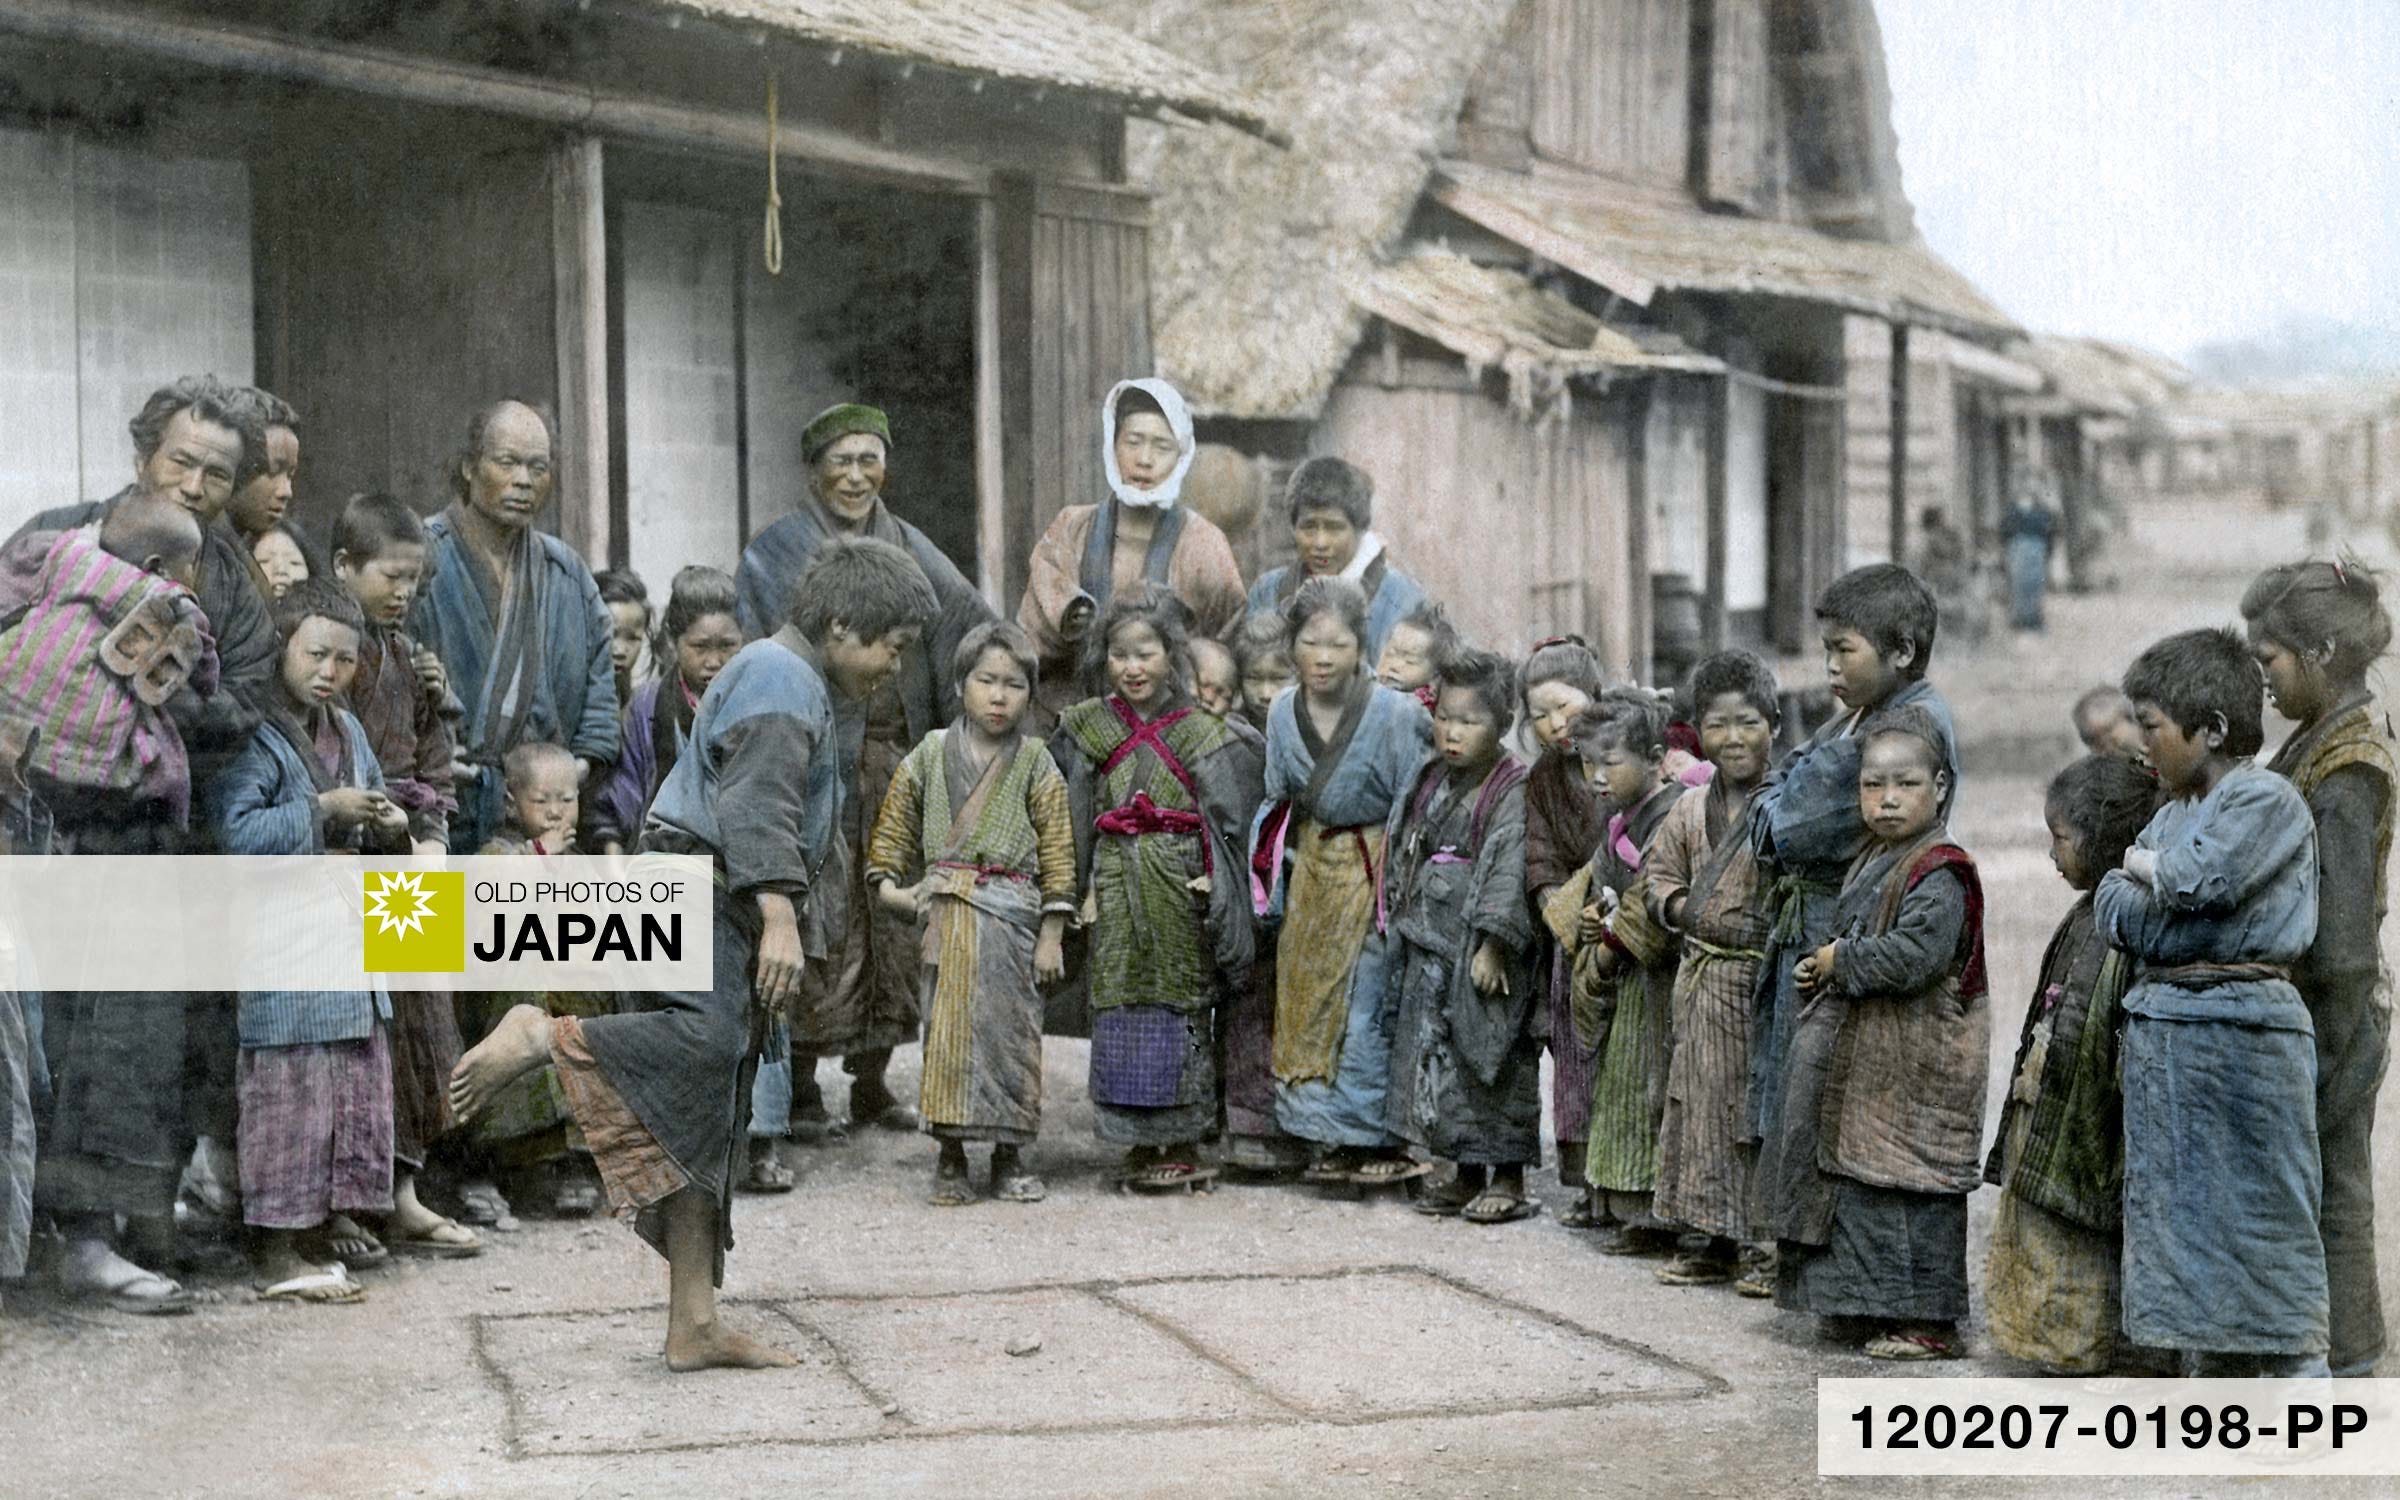 A boy playing hopscotch (石けり) in a Japanese village, 1890s